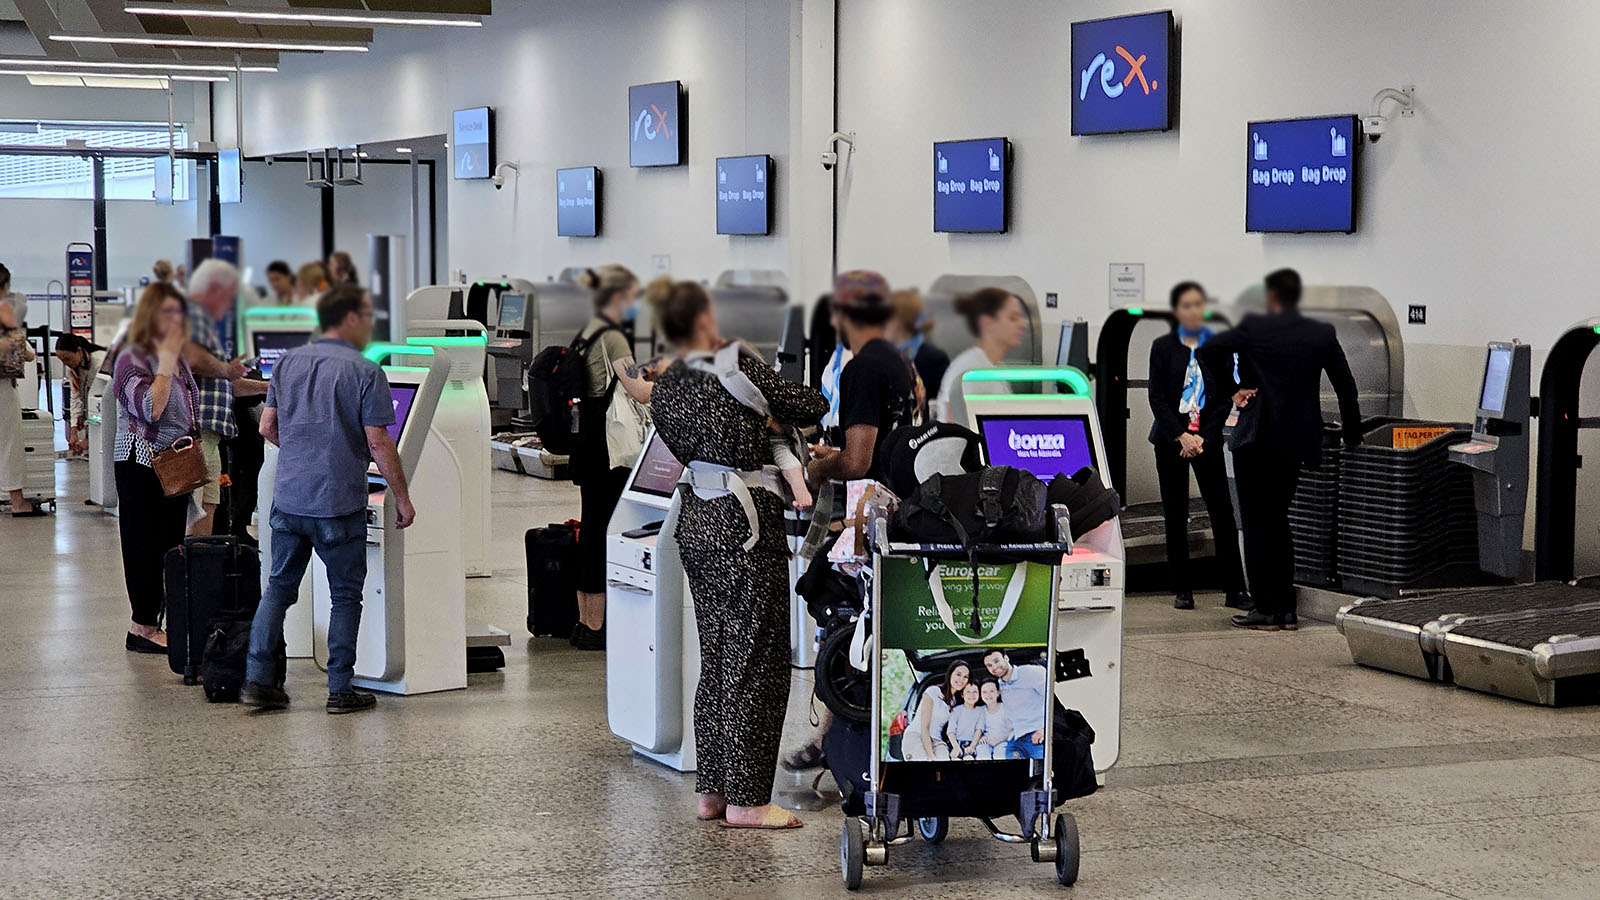 Melbourne Airport check-in for Rex Boeing 737 Economy Class